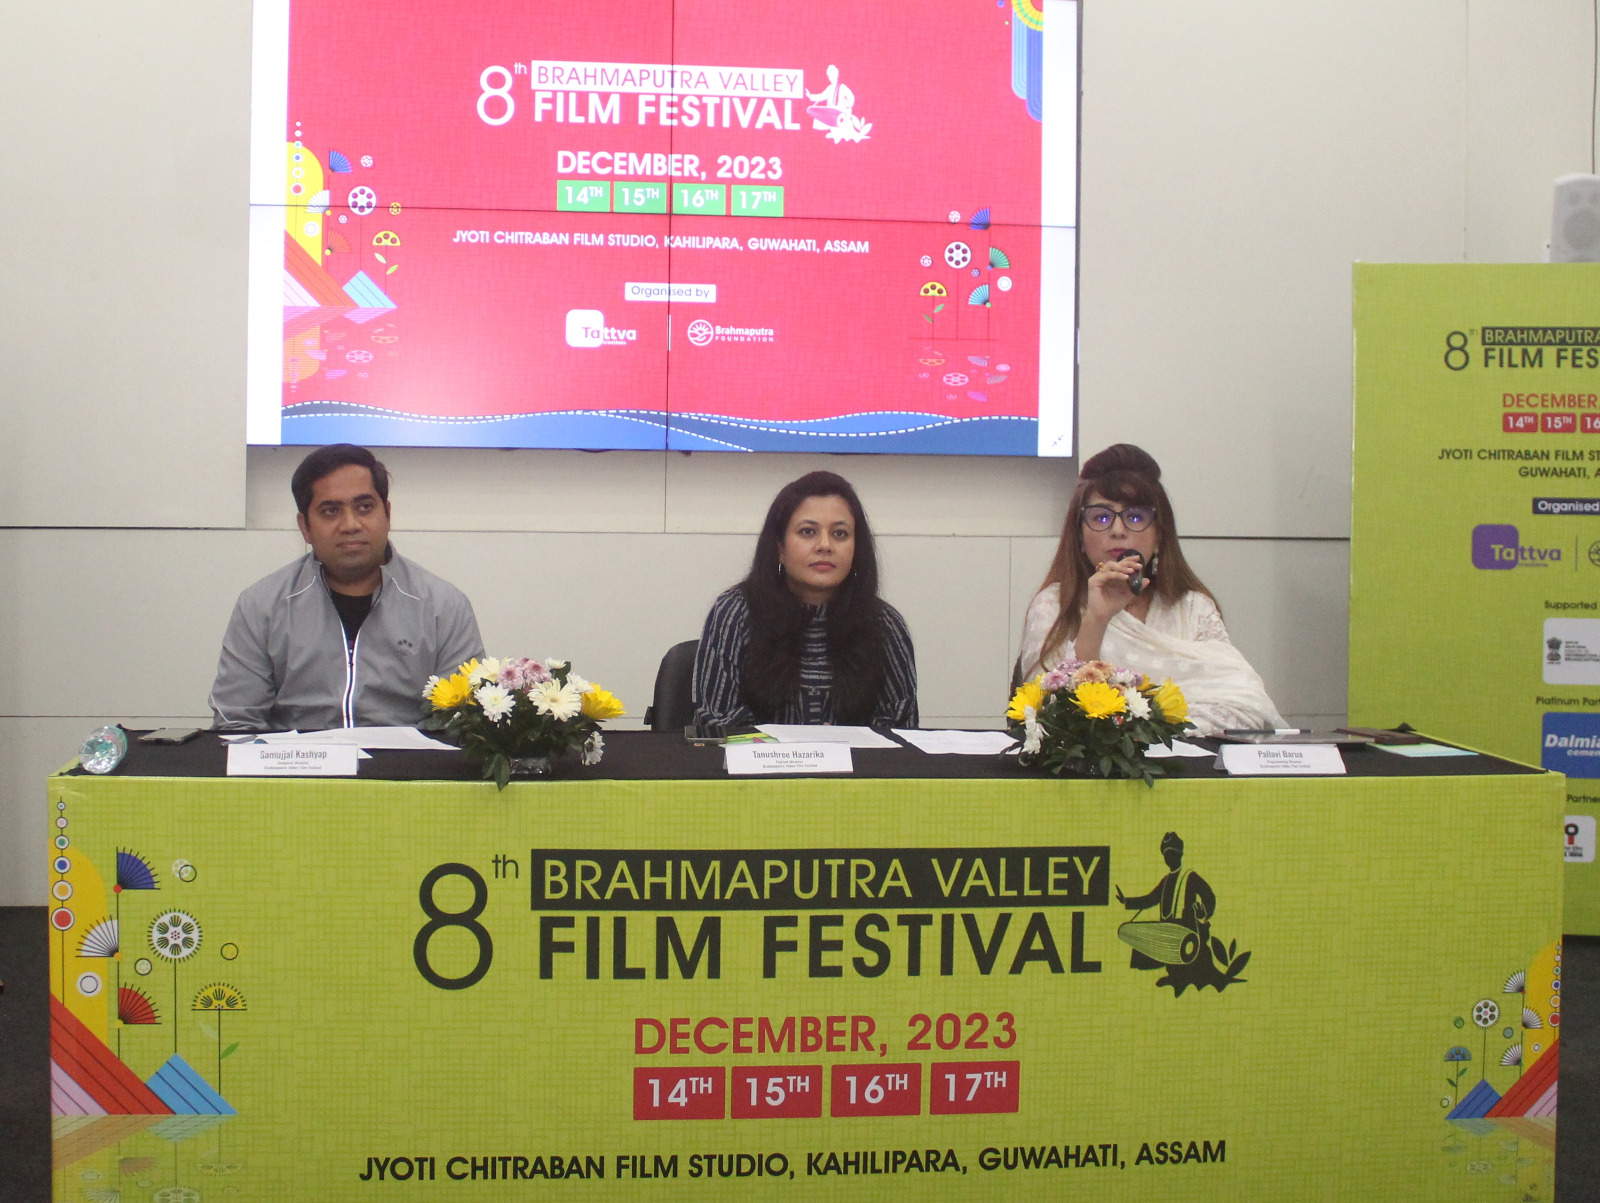 Assam: Brahmaputra Valley Film Festival unveils an exciting lineup for its 8th edition in Guwahati